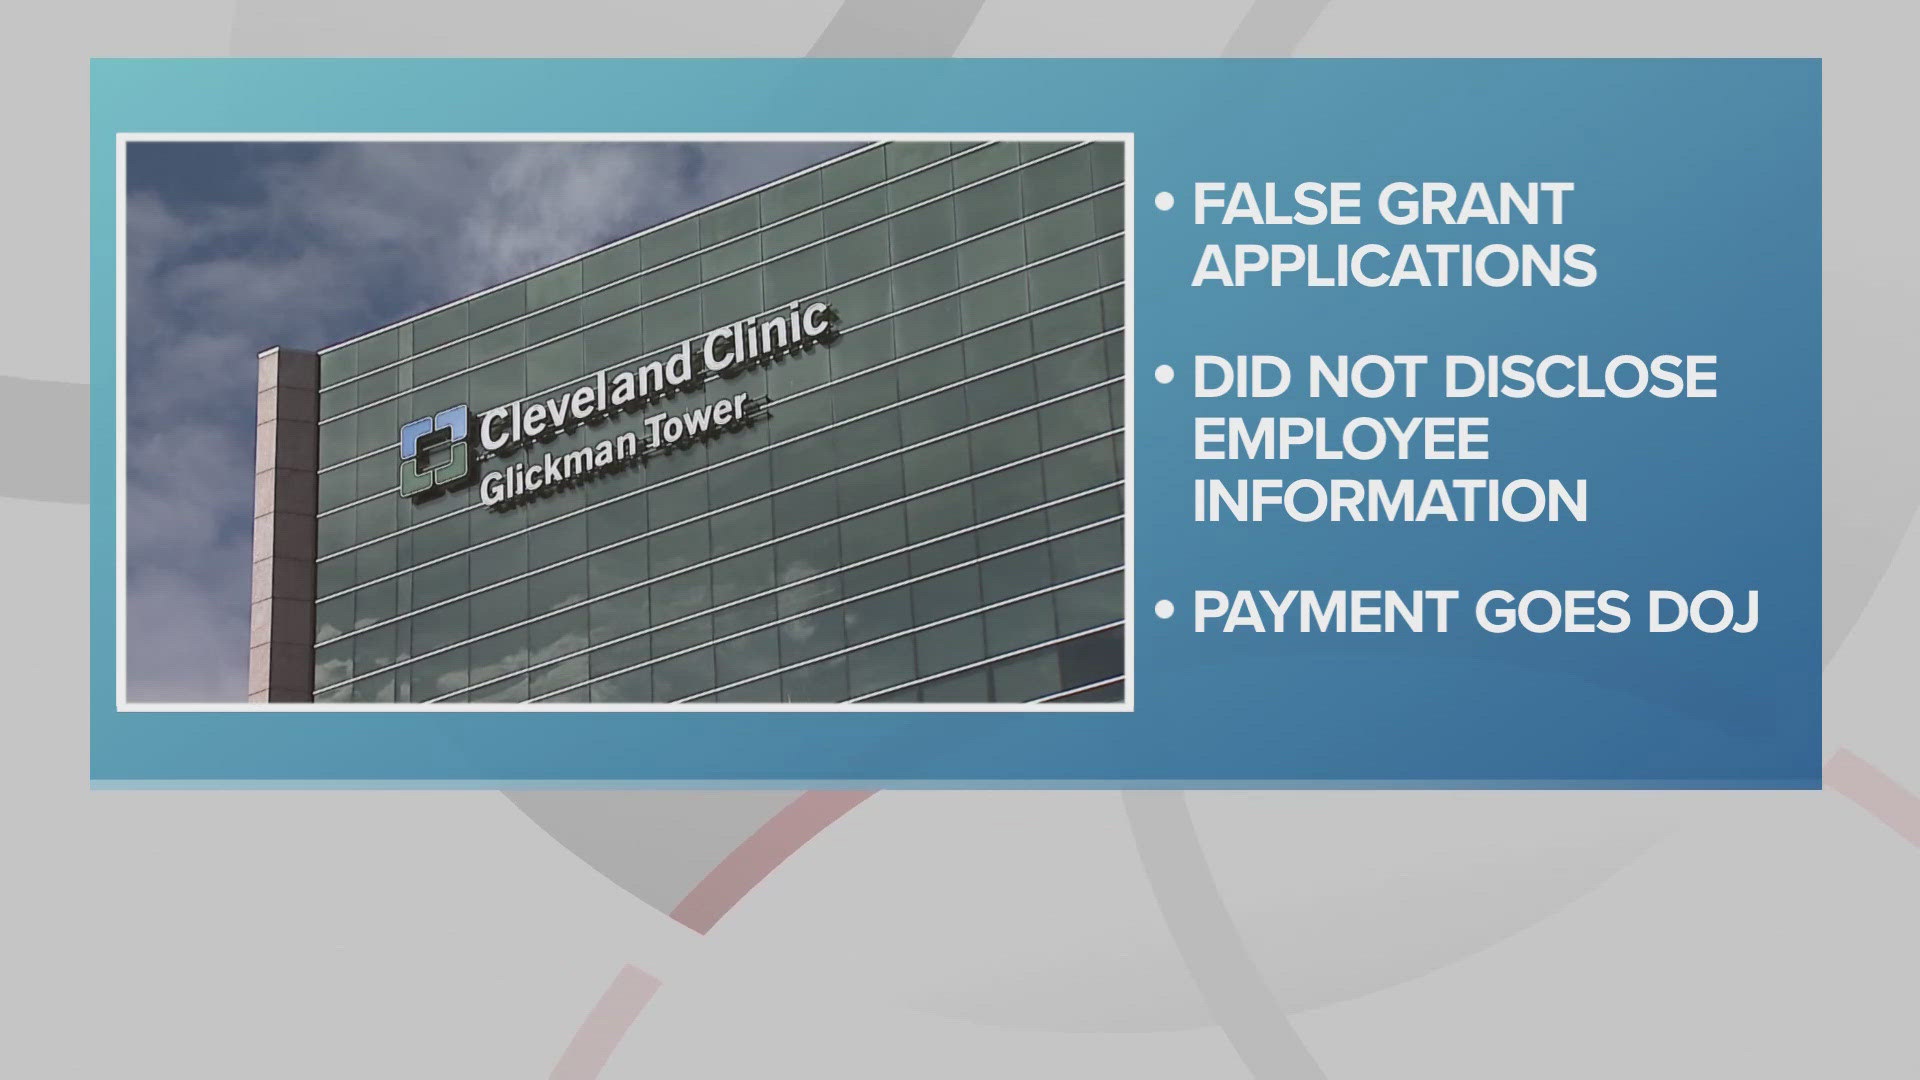 Investigators had accused the Clinic of submitting false federal grant applications by failing to disclose an employee's sources of financial assistance.